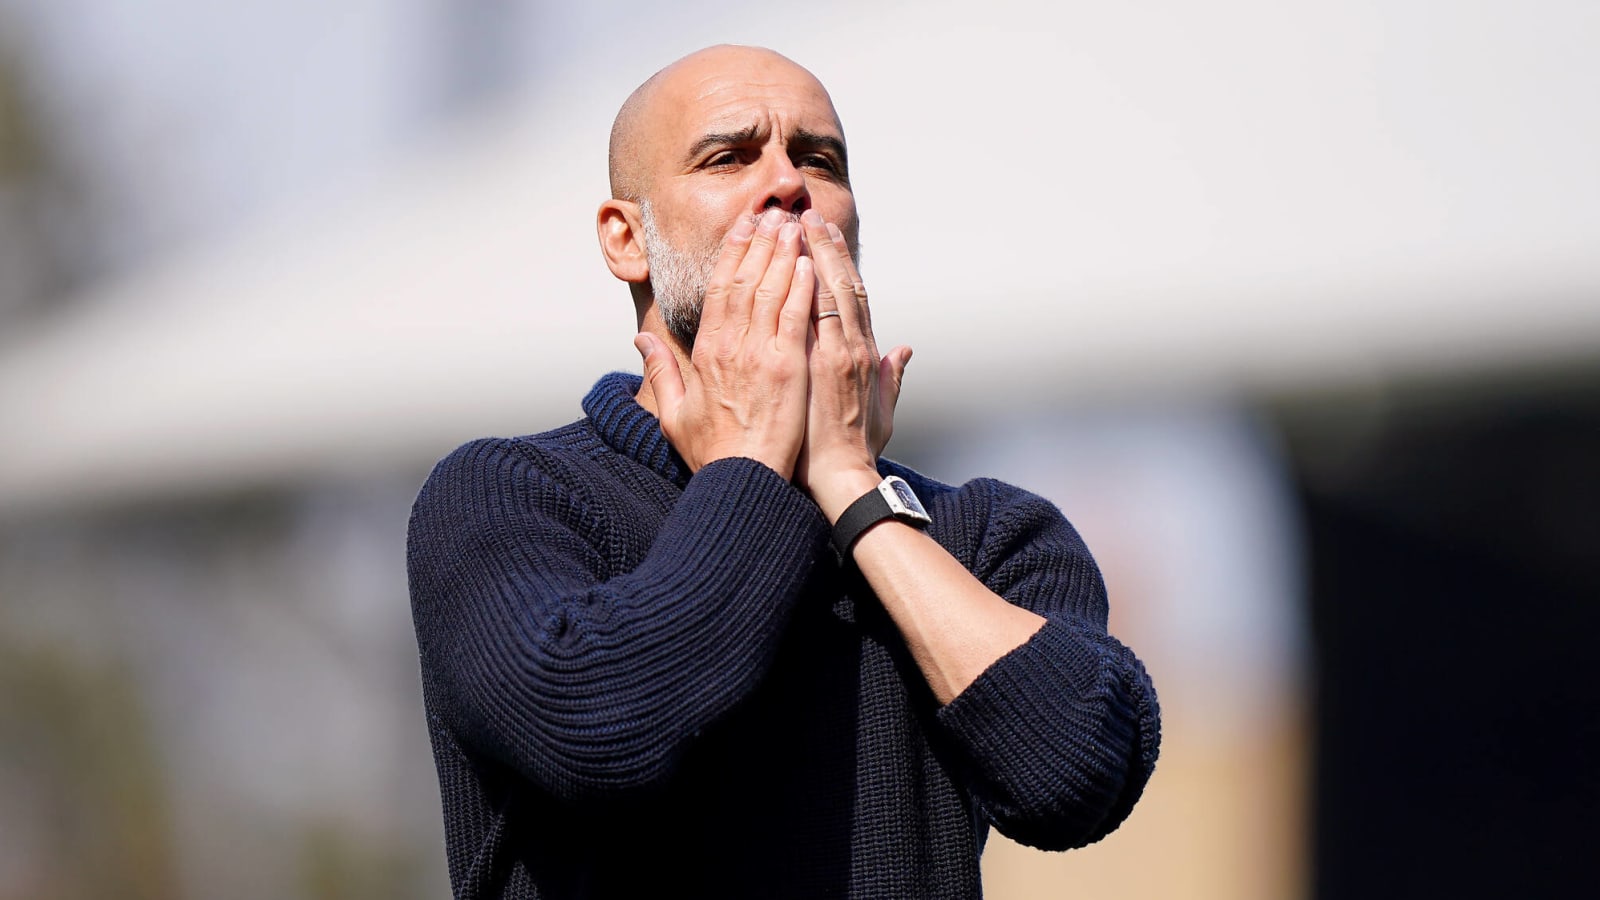 ‘Frustrated’ Pep Guardiola hits back at people suggesting the league is getting boring with Manchester City’s dominance: 'You say it’s all about the money?'